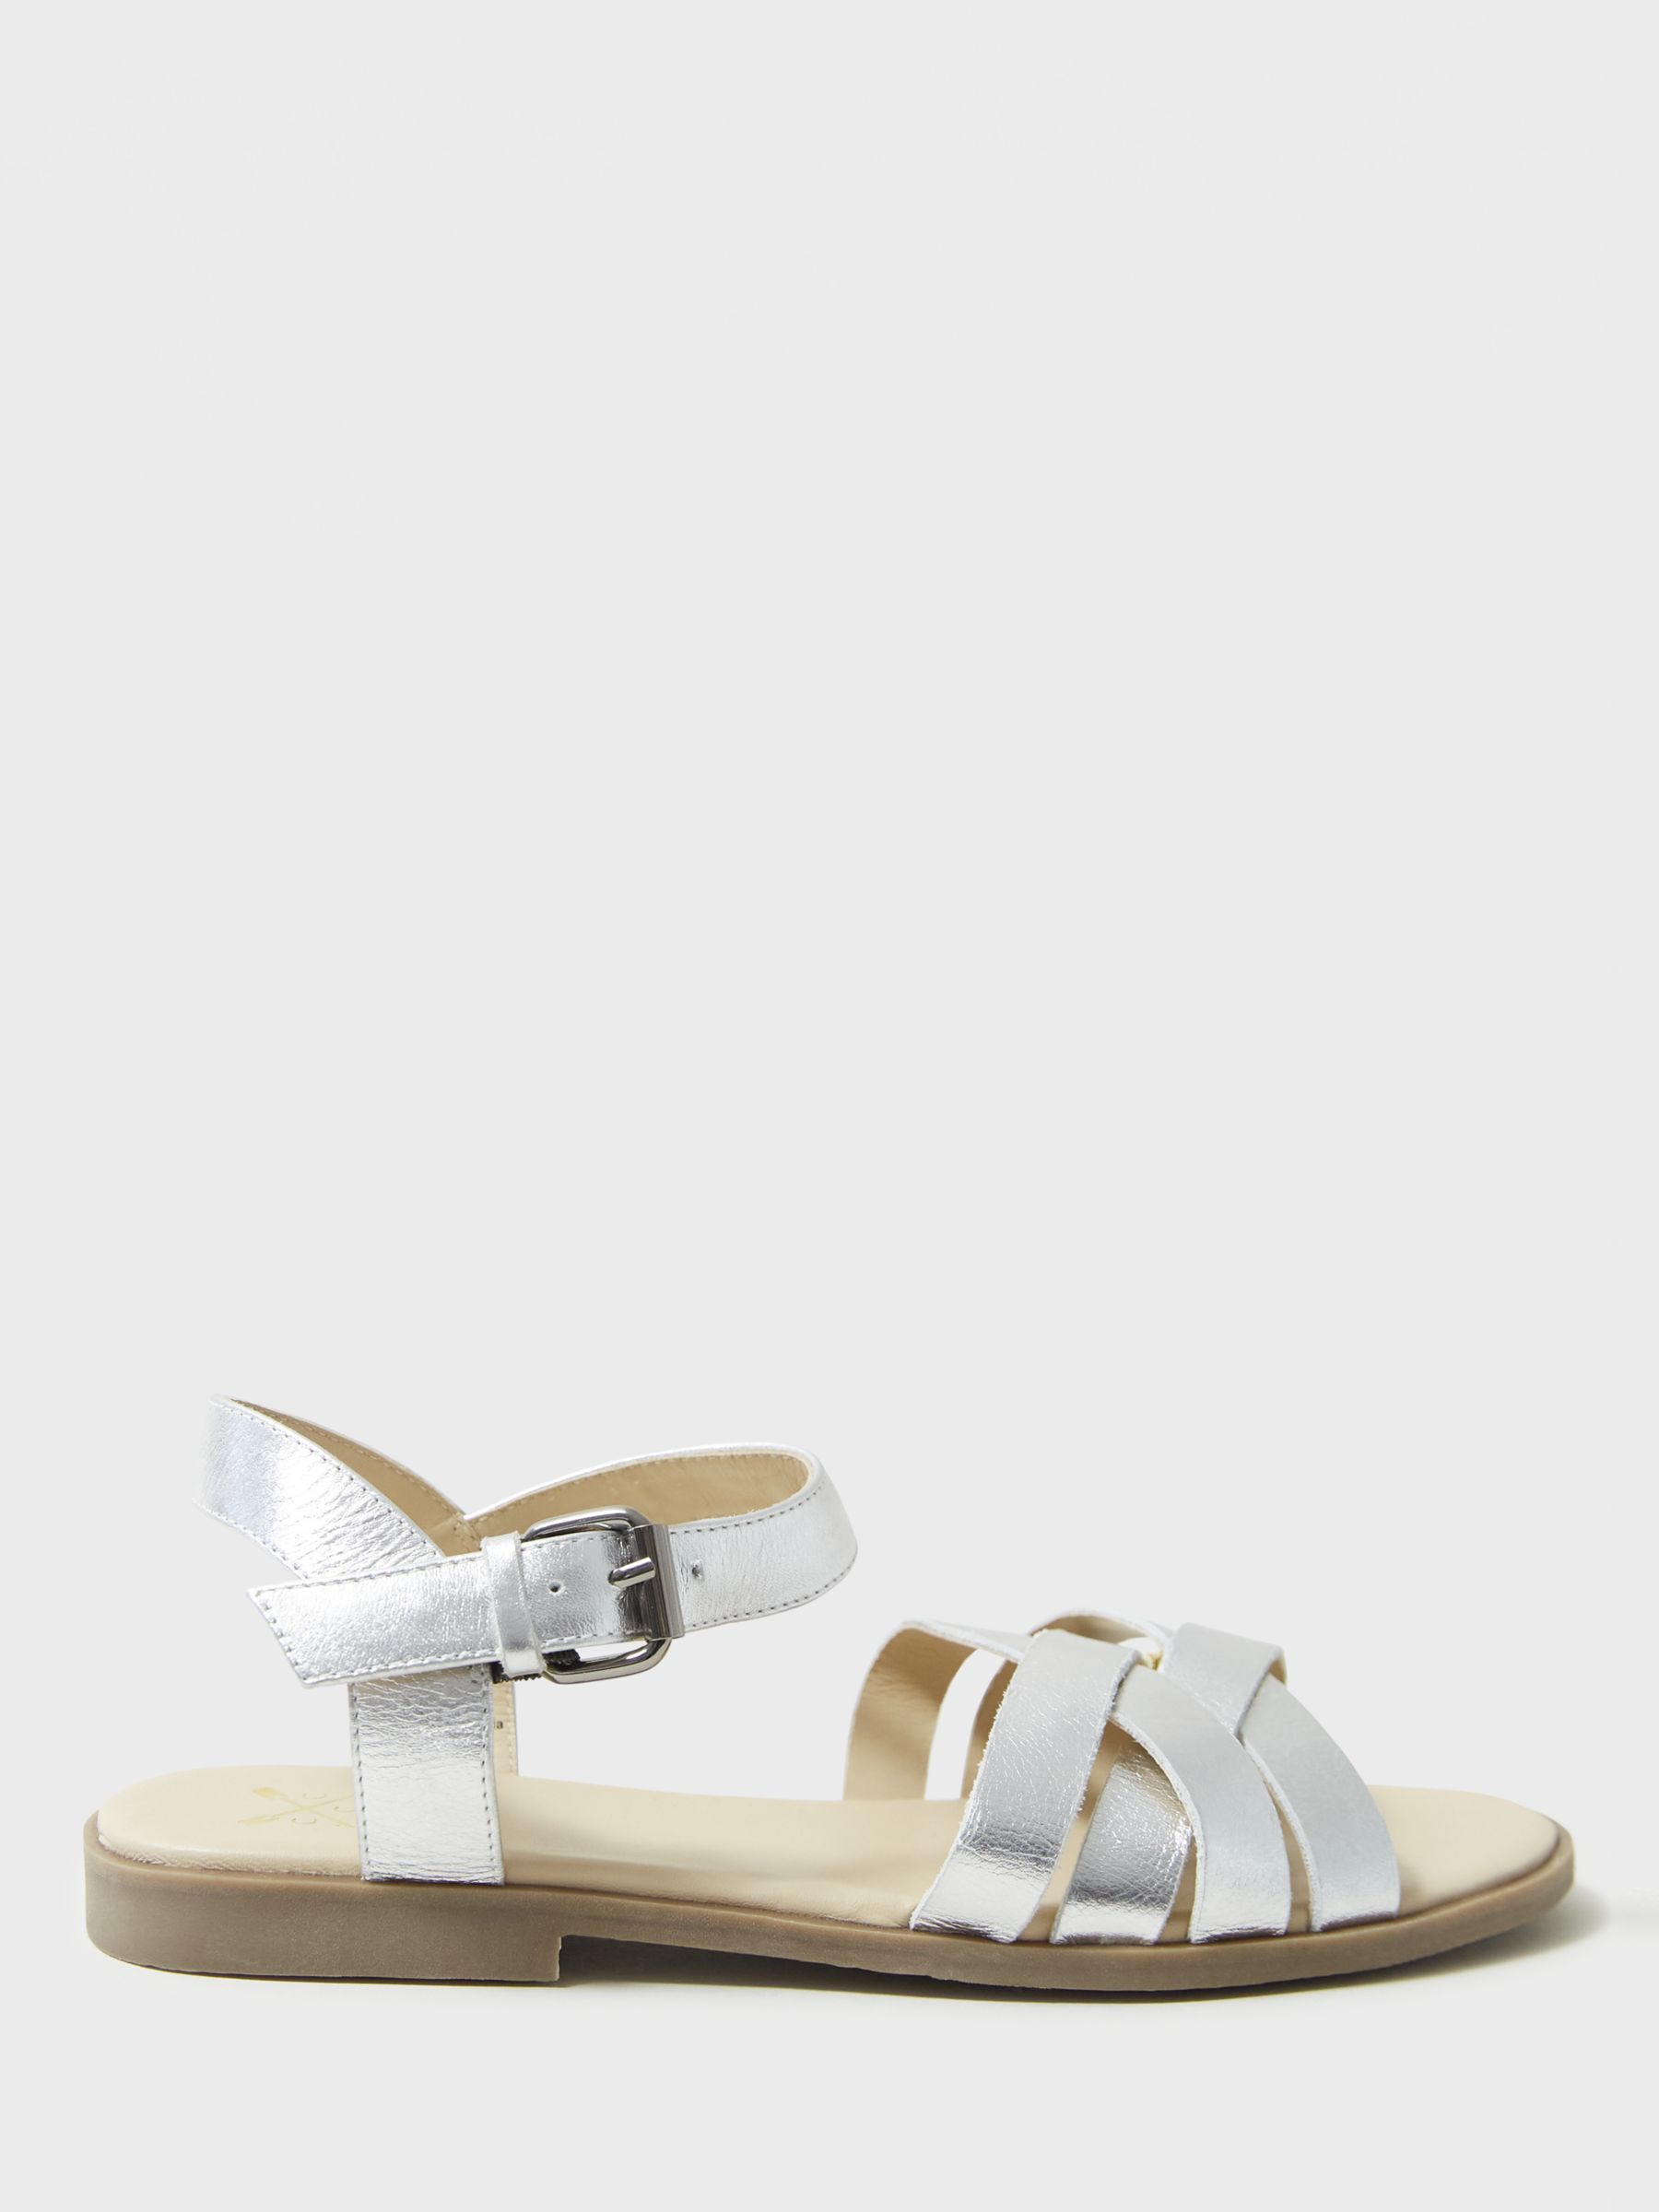 Crew Clothing Crossover Multi Strap Sandal, Silver, 8